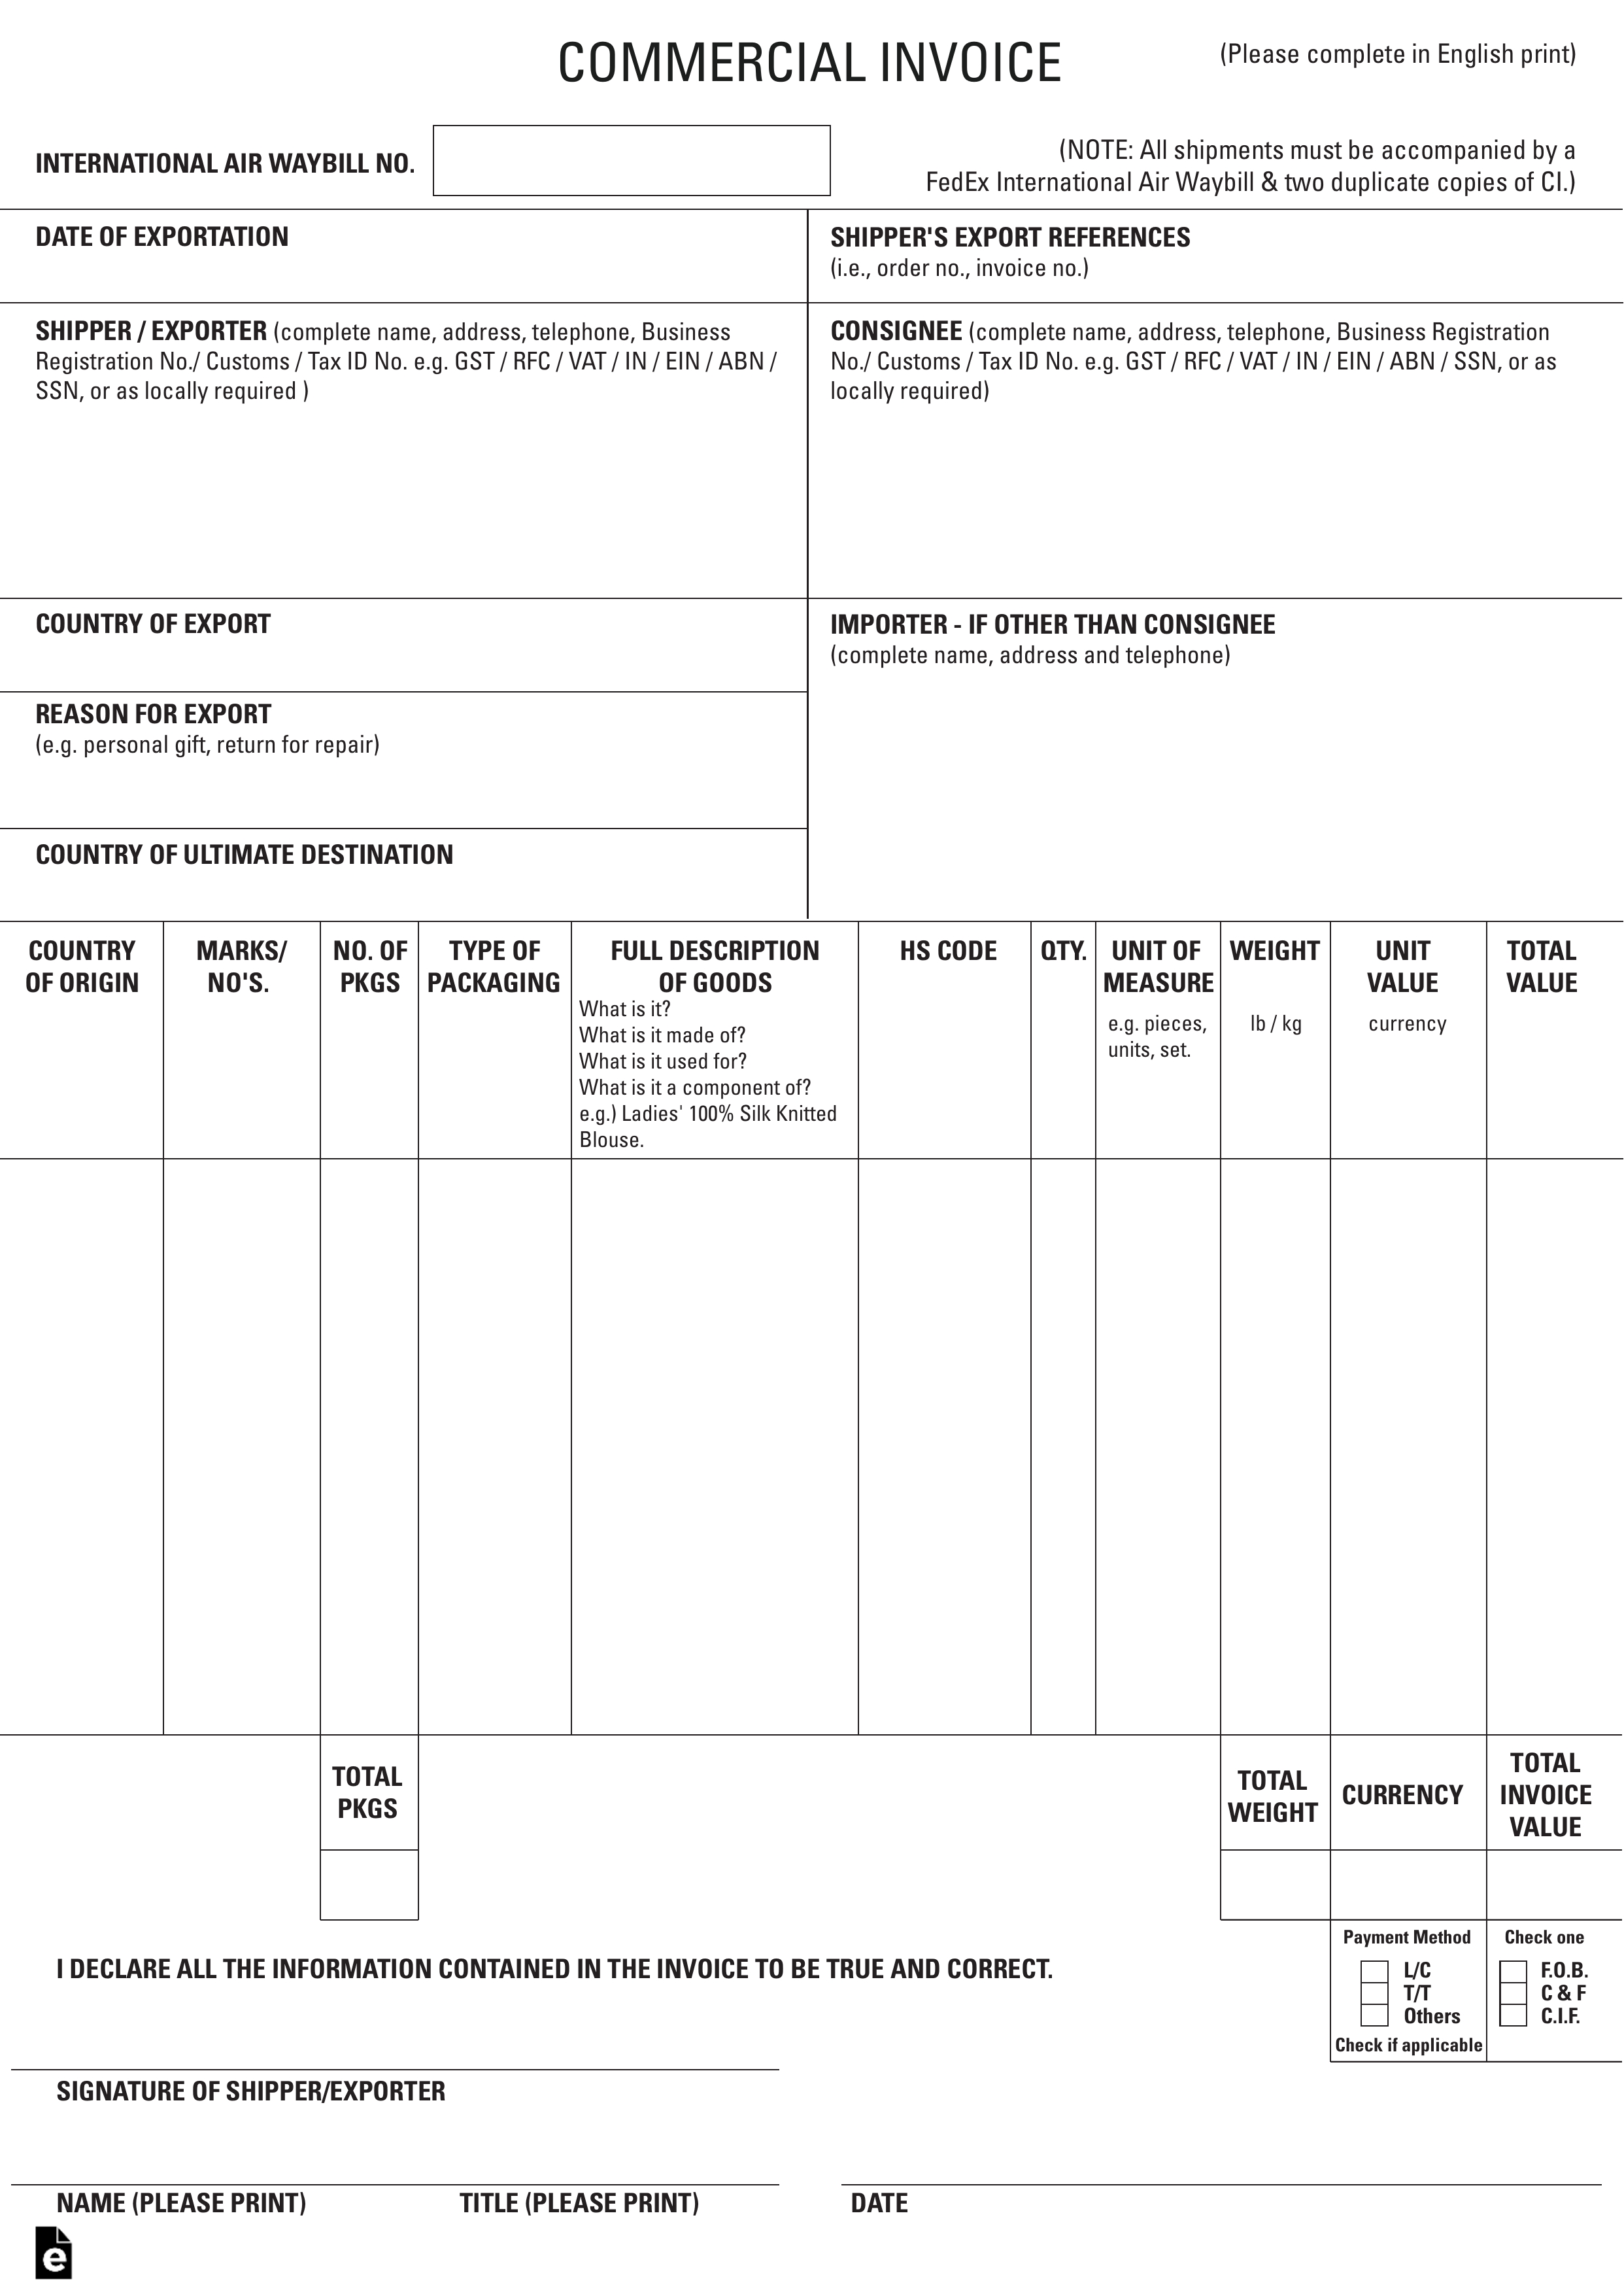 free international commercial invoice templates pdf commercial invoice template export